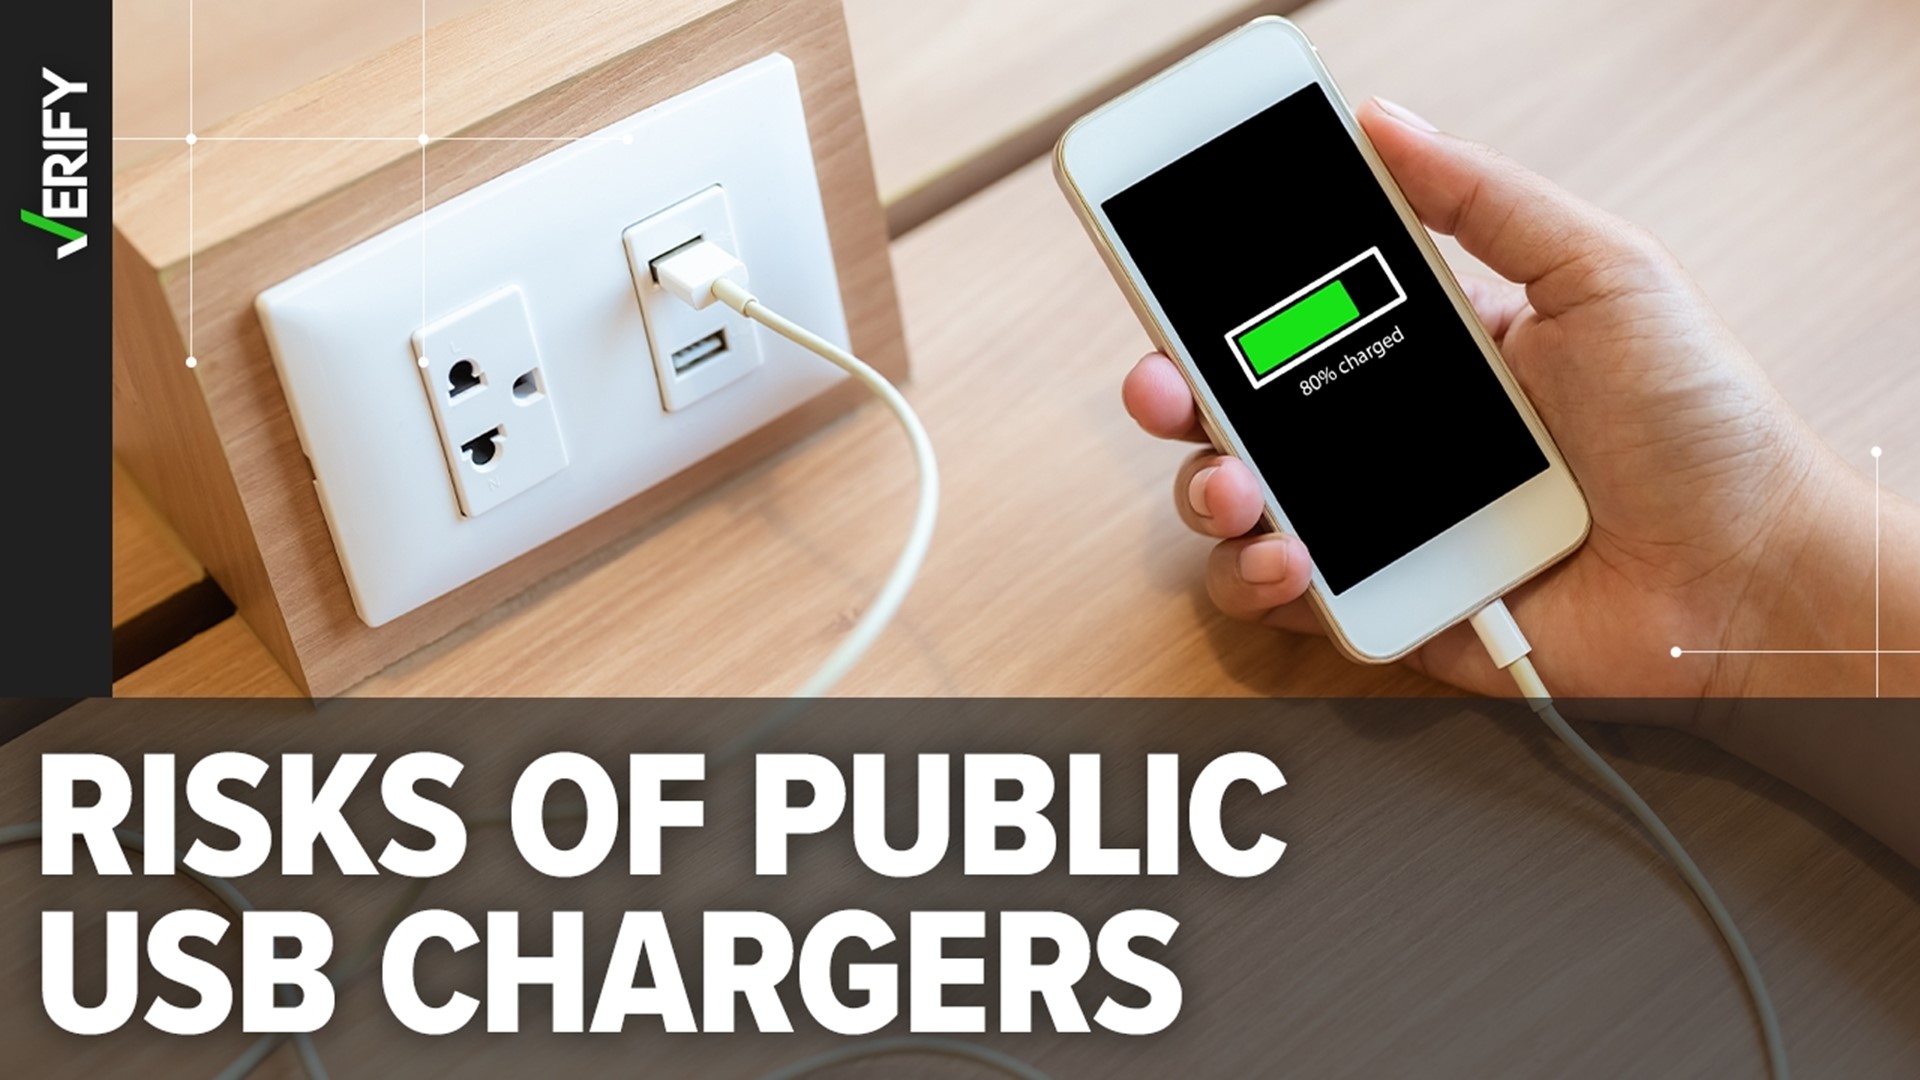 The FBI is warning against the use of USB charging stations in airports and other public places. Here’s what to know about “juice jacking.”